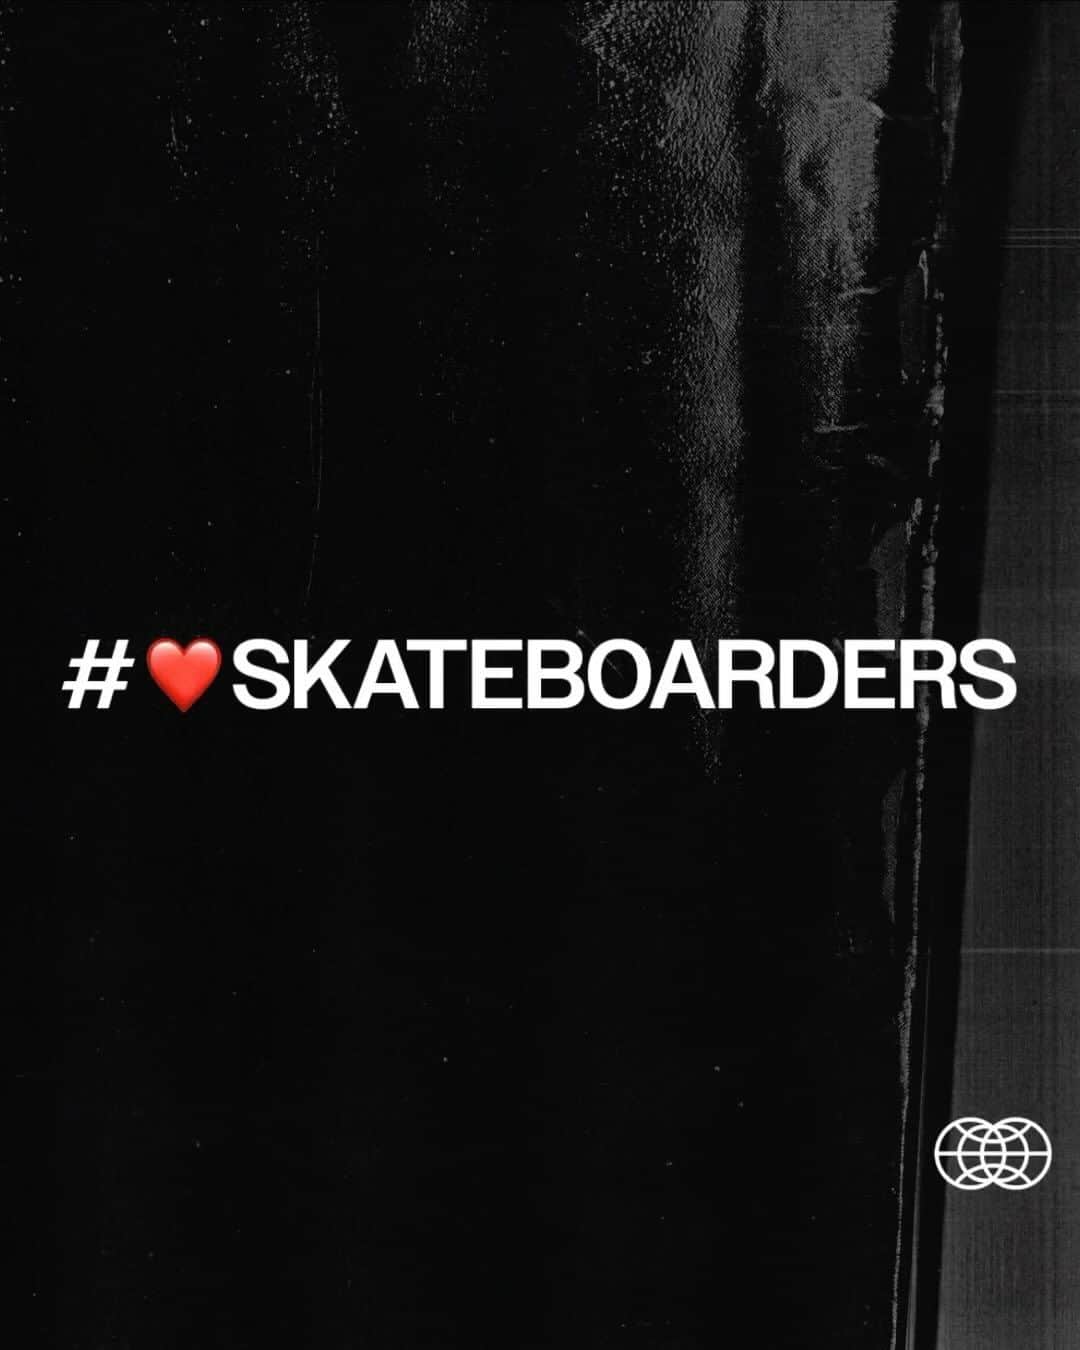 The Berricsのインスタグラム：「Every day we’re going to look at  #❤️skateboarders and pull what we see and feature them on our page, no matter who they are, what they’re doing or what level of skateboarding they’re at, because we love you, appreciate you, and you’re important to the survival of skateboarding as a whole, even if you don’t know it yet. - sb   1) @shaunhover - Hardlfip through the fence!! ⛓️ 💪   2) @jaxdecker_effs - A helping hand 🤝 with @james_cruickshank_ 🙏   3) @methskateboards - Indoor 360 flip double set 🙌🙌   4) @boonieshq - Trick shot on a mini ramp 🏀   5) @orellryan - 3 year battle trick 🔥🔥   #❤️skateboarders #berrics #skateboardingisfun」